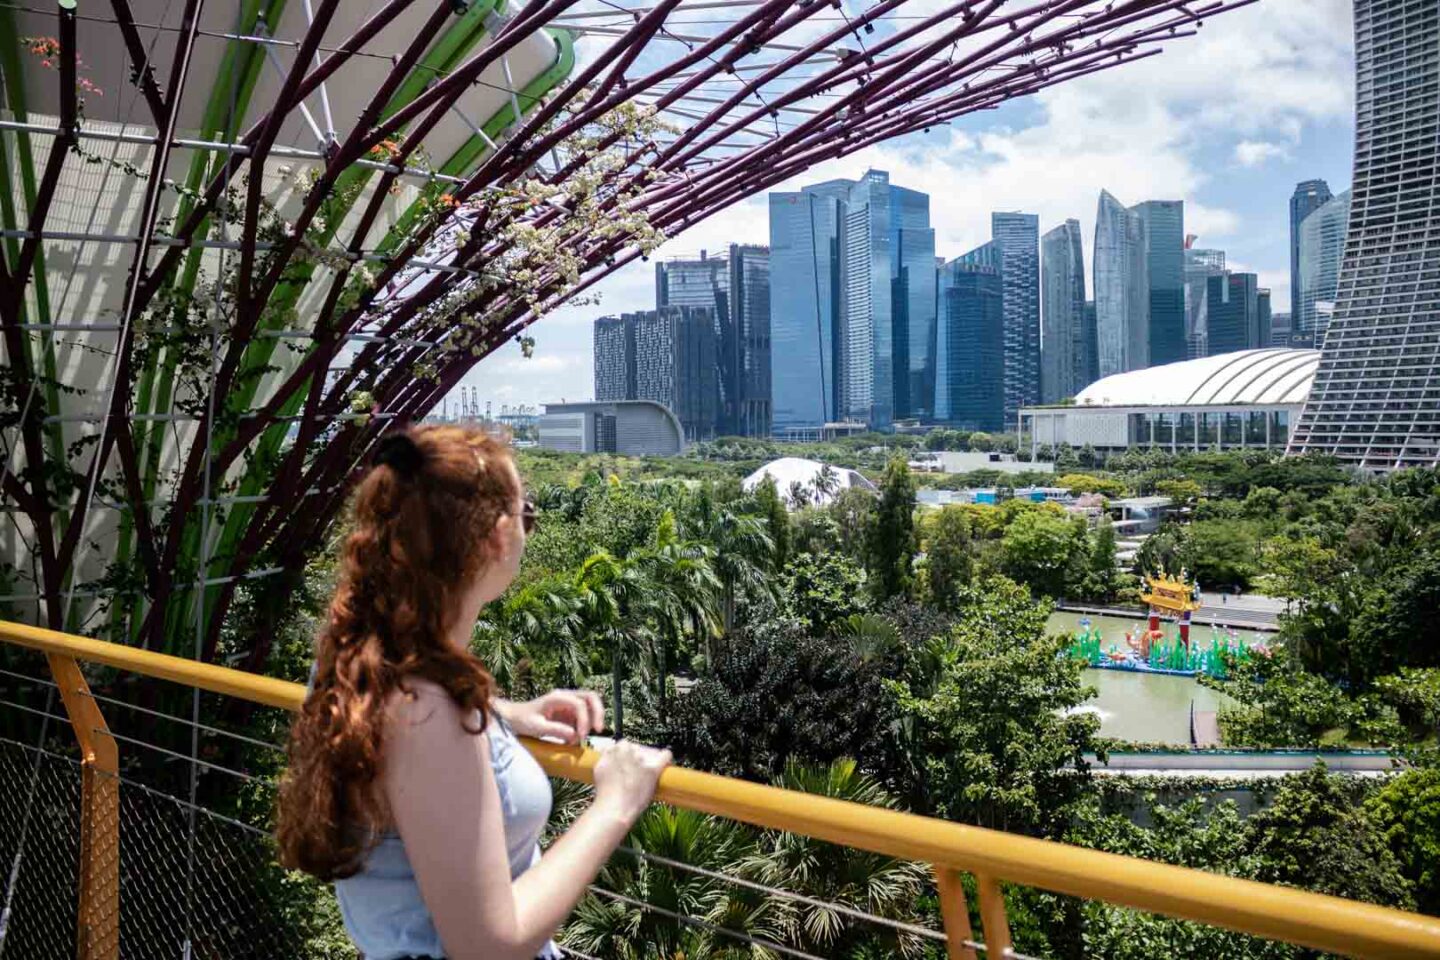 OCBC Skyway viewpoint, visiting Gardens by the Bay